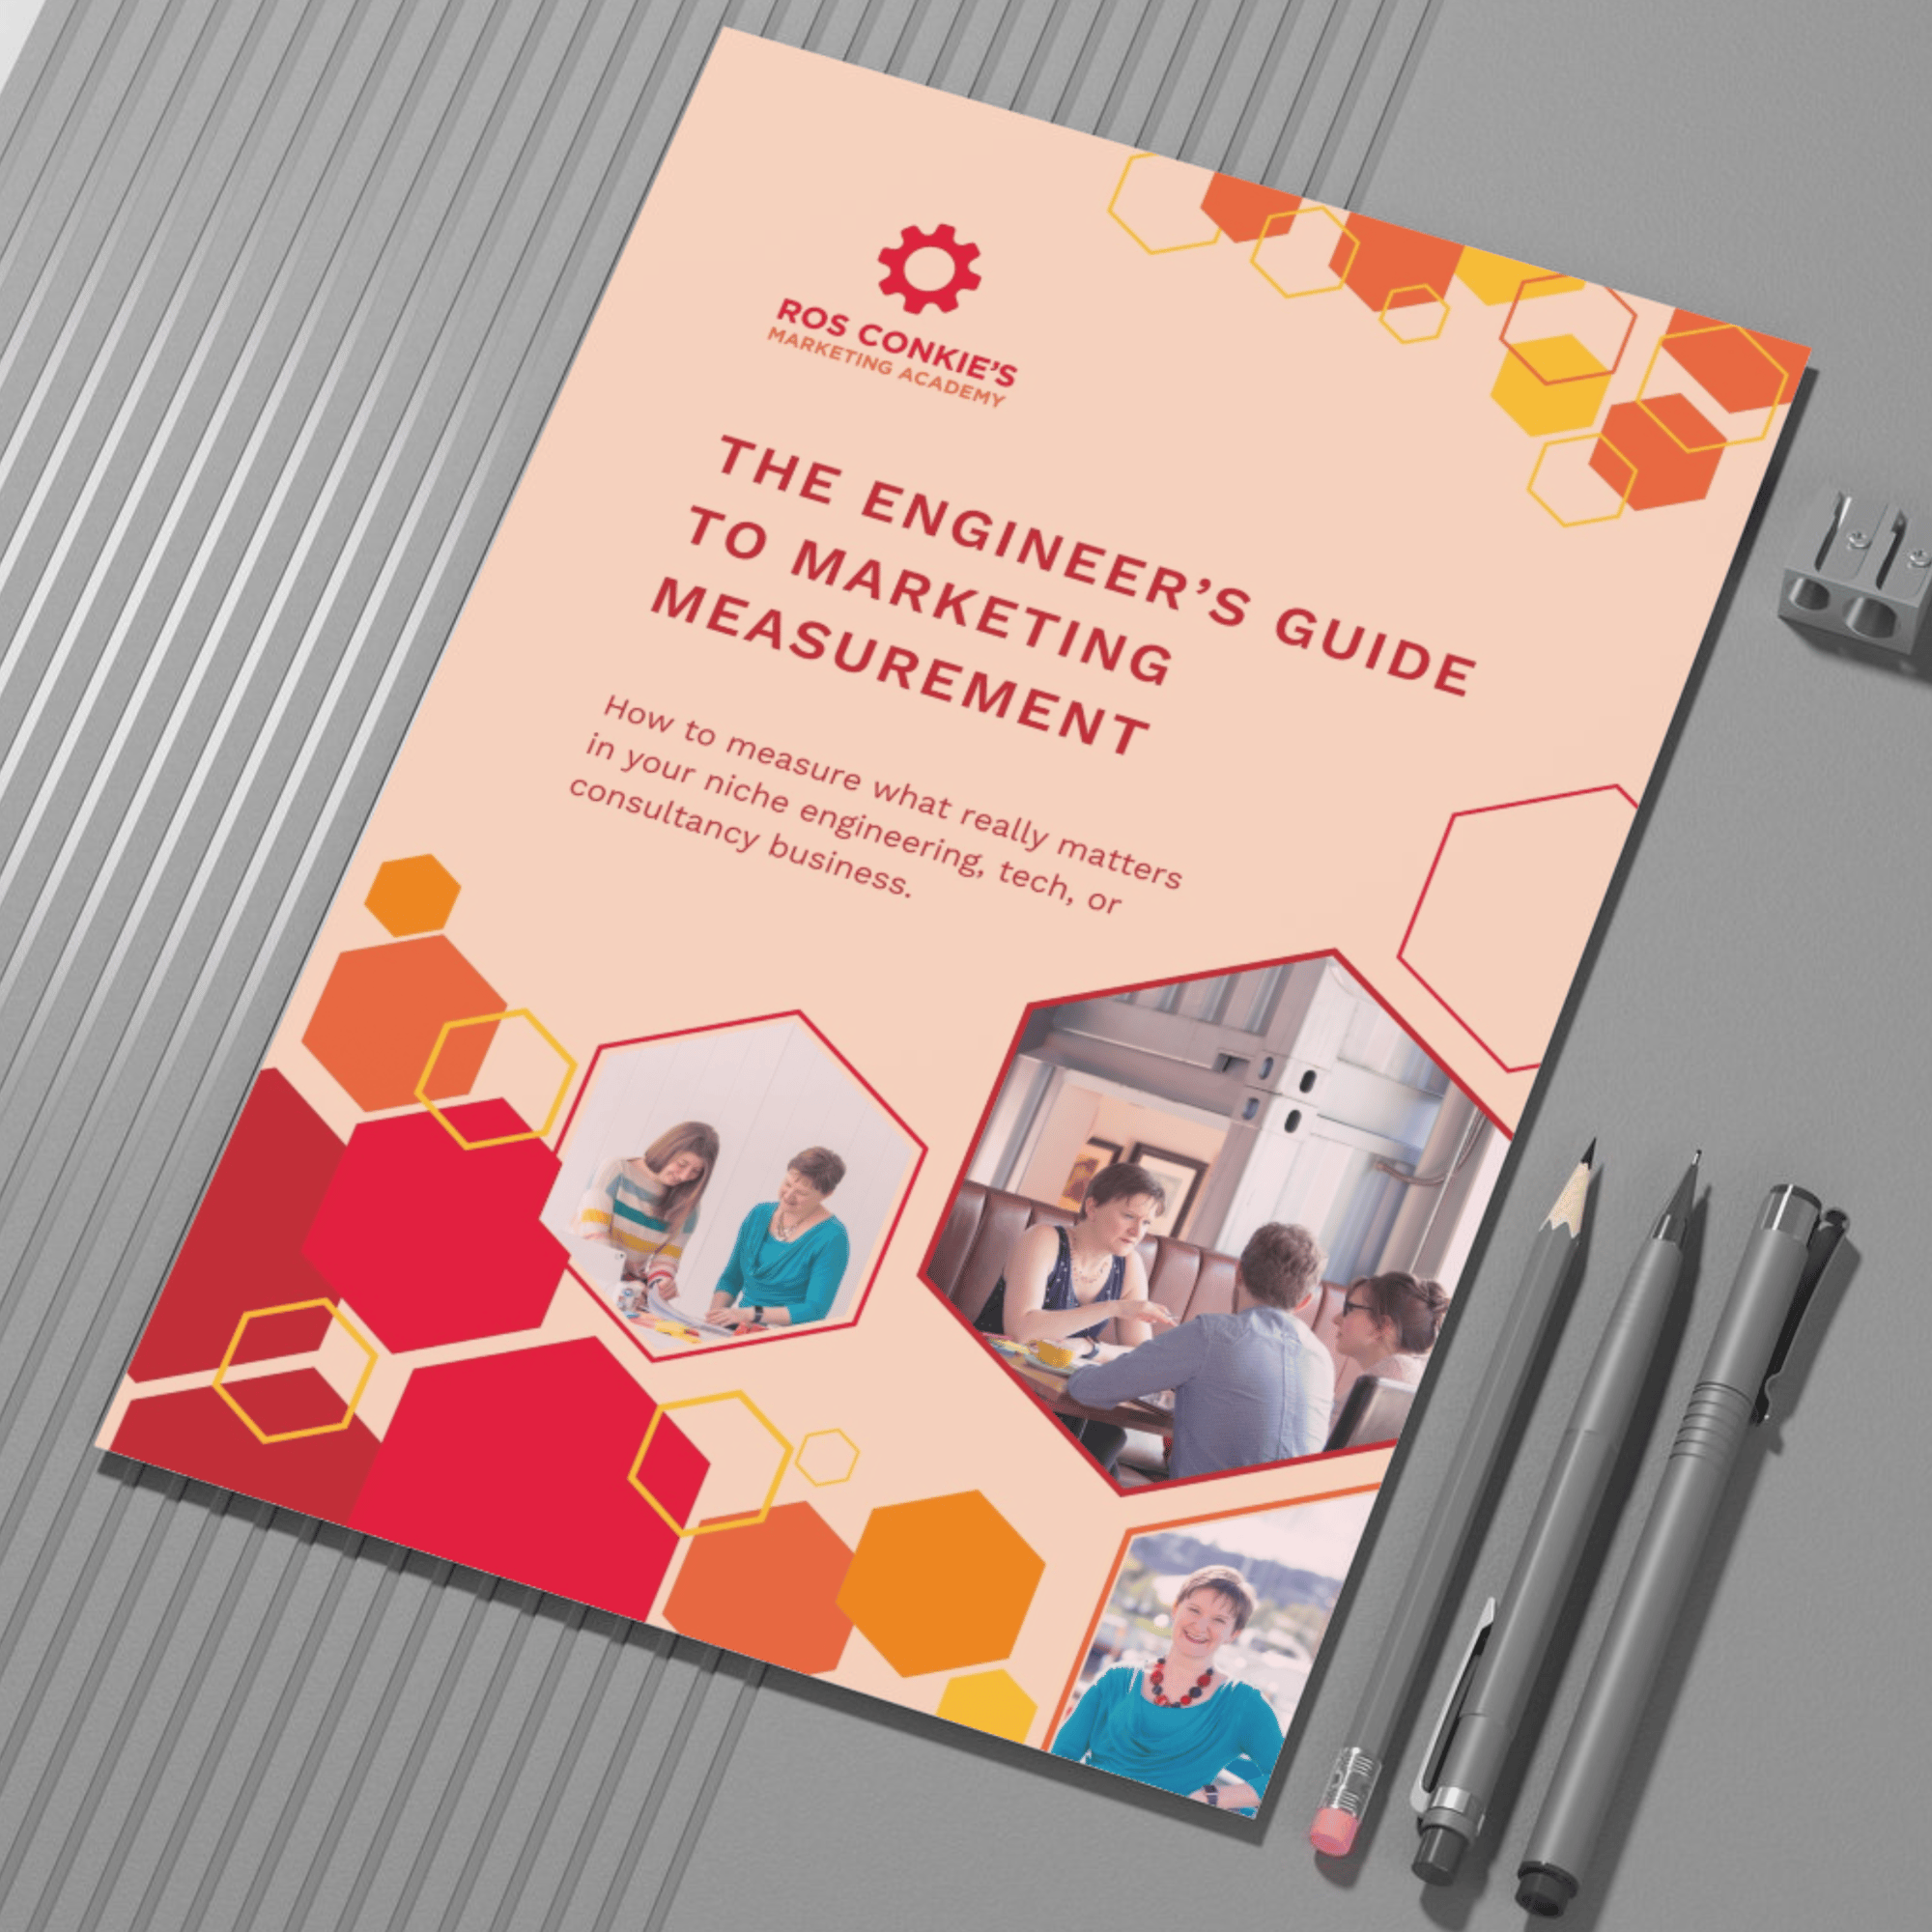 PDF Guide: The Engineer's Guide to Marketing Measurement